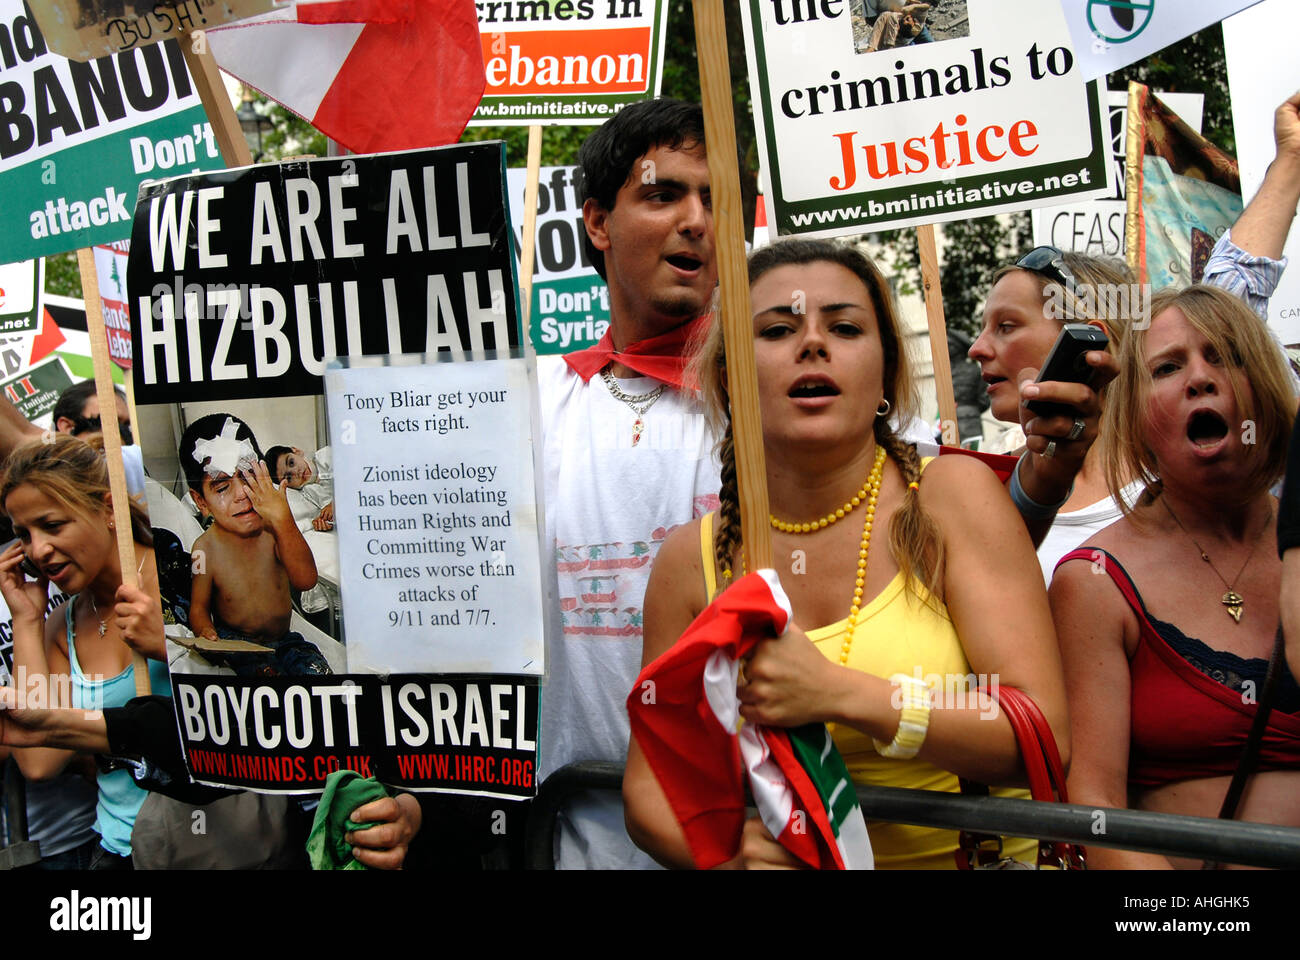 Demonstration outside Downing Street London of about 100,000 people protesting Israeli attack on Lebanon on August 5 2006. Stock Photo